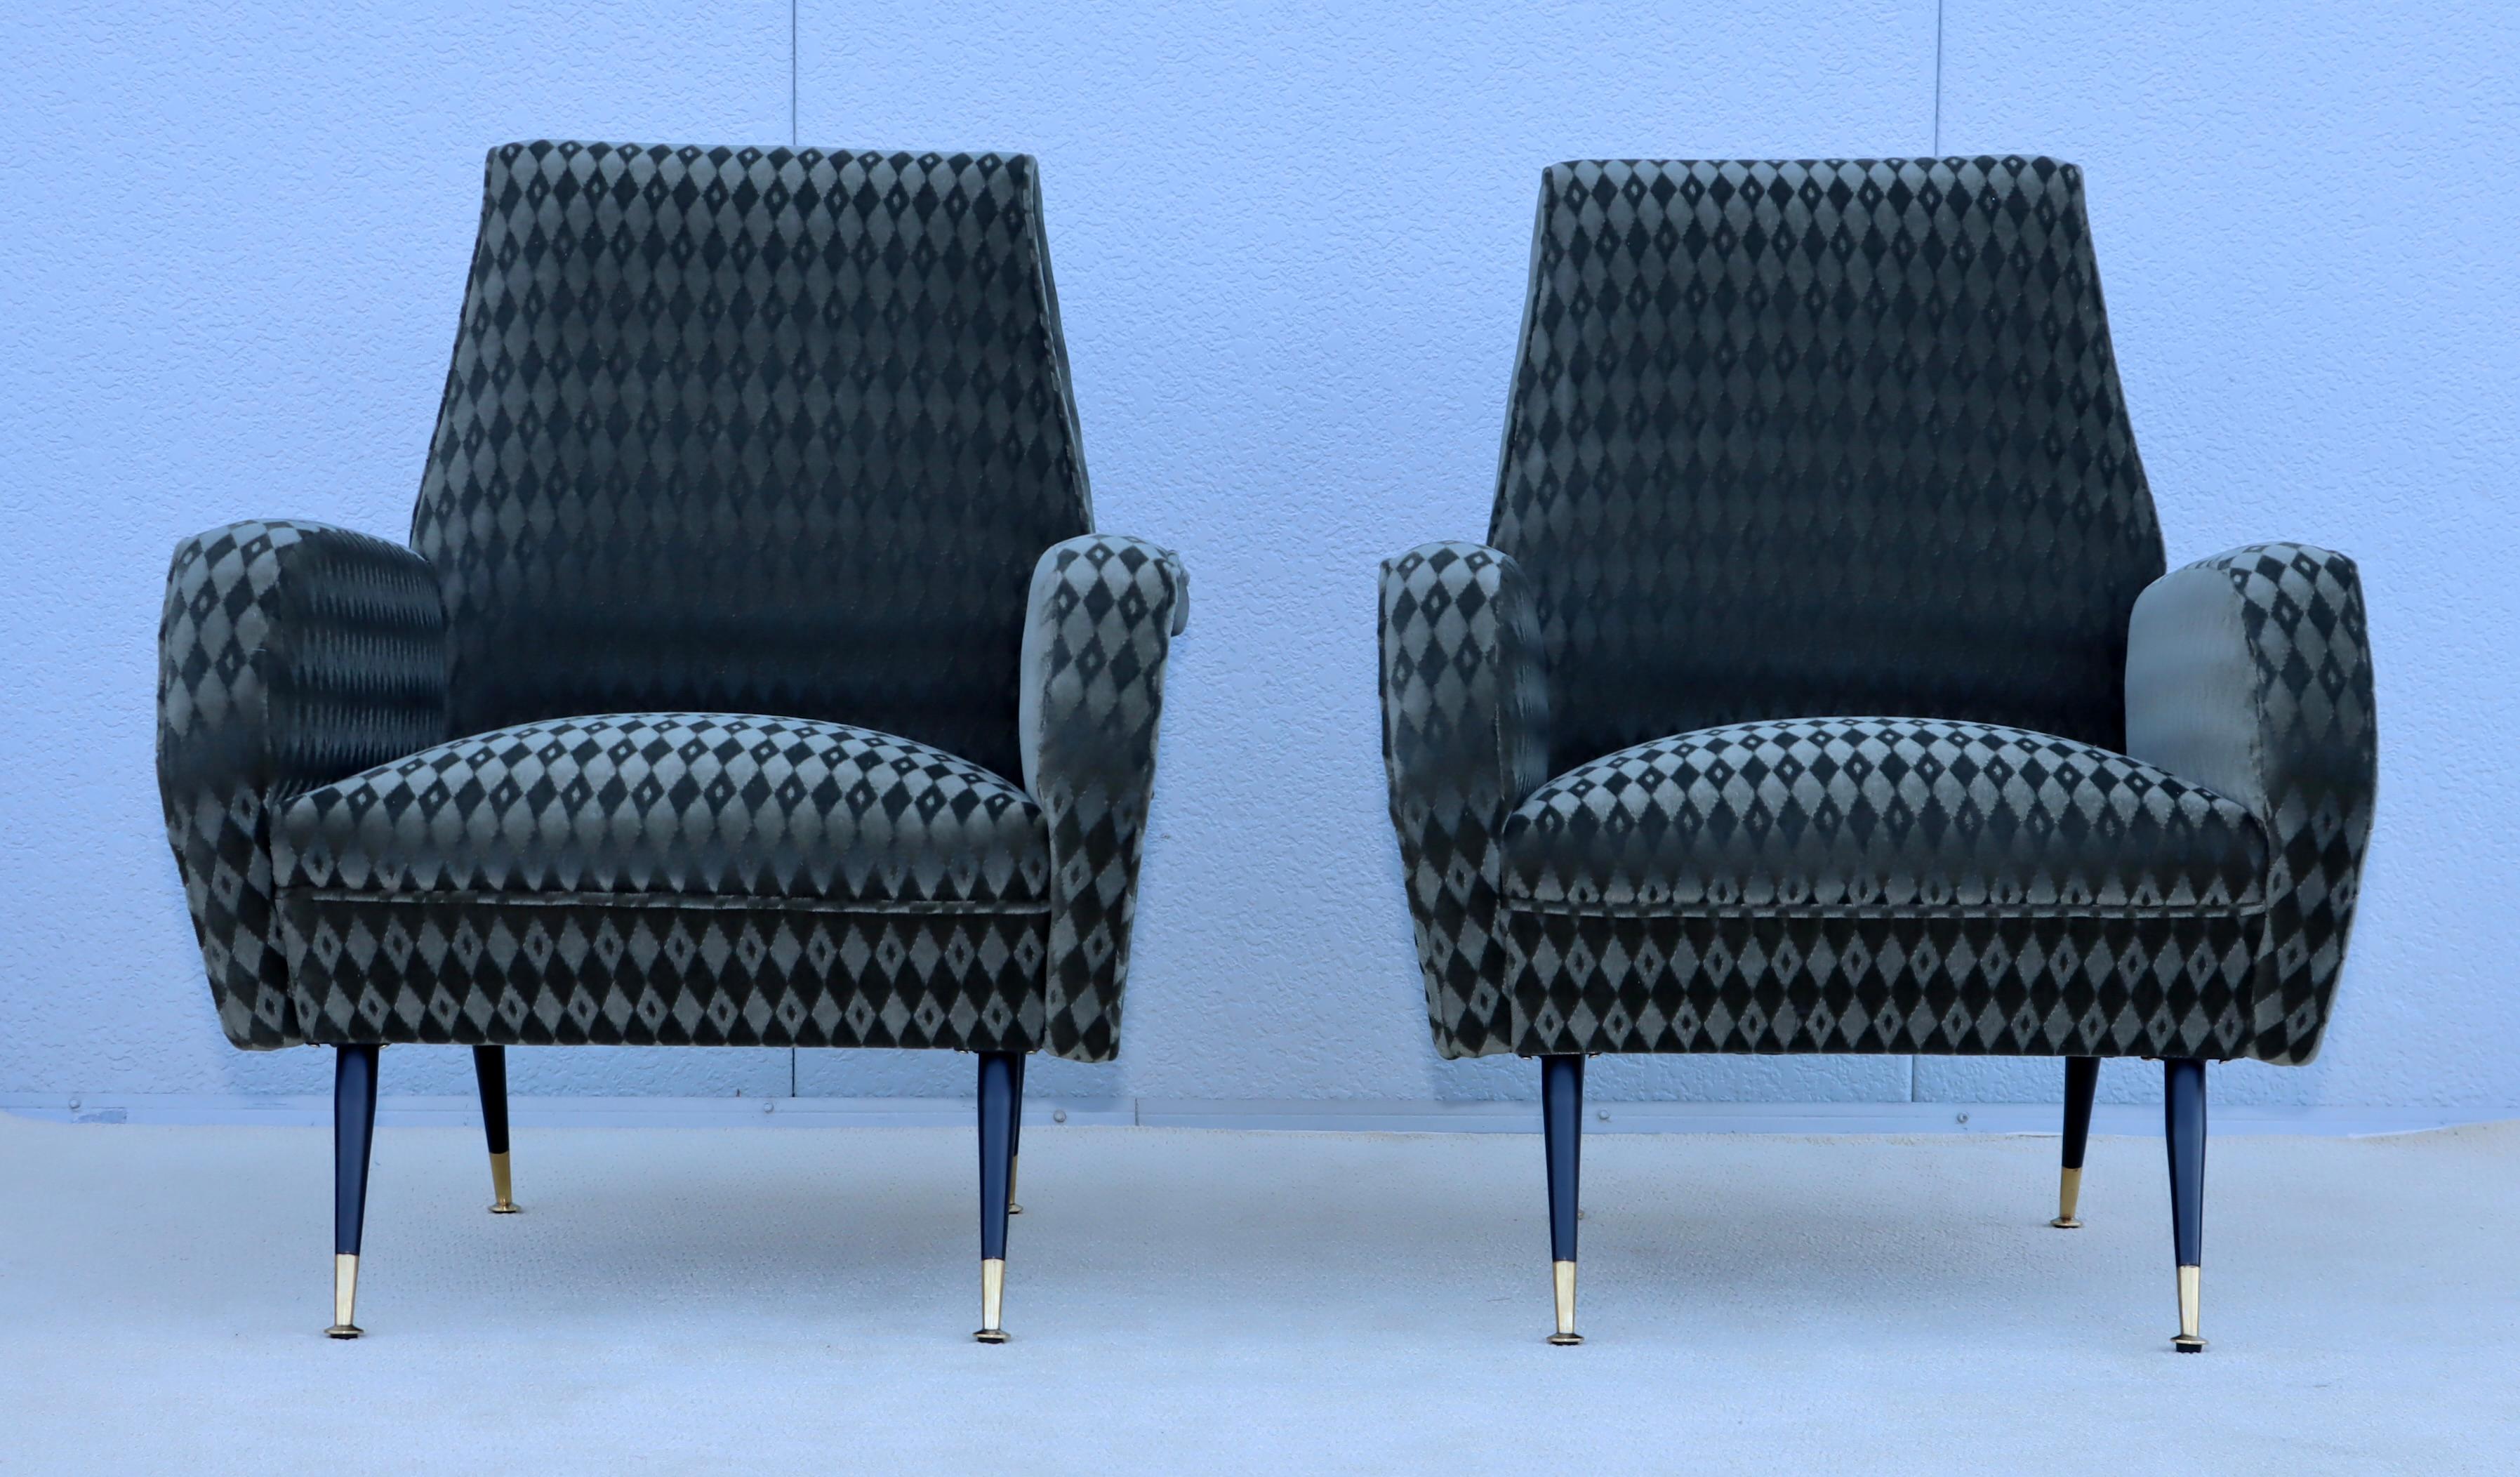 1950's Mid-Century Modern Italian Lounge Chairs With Donghia Mohair Upholstery For Sale 1